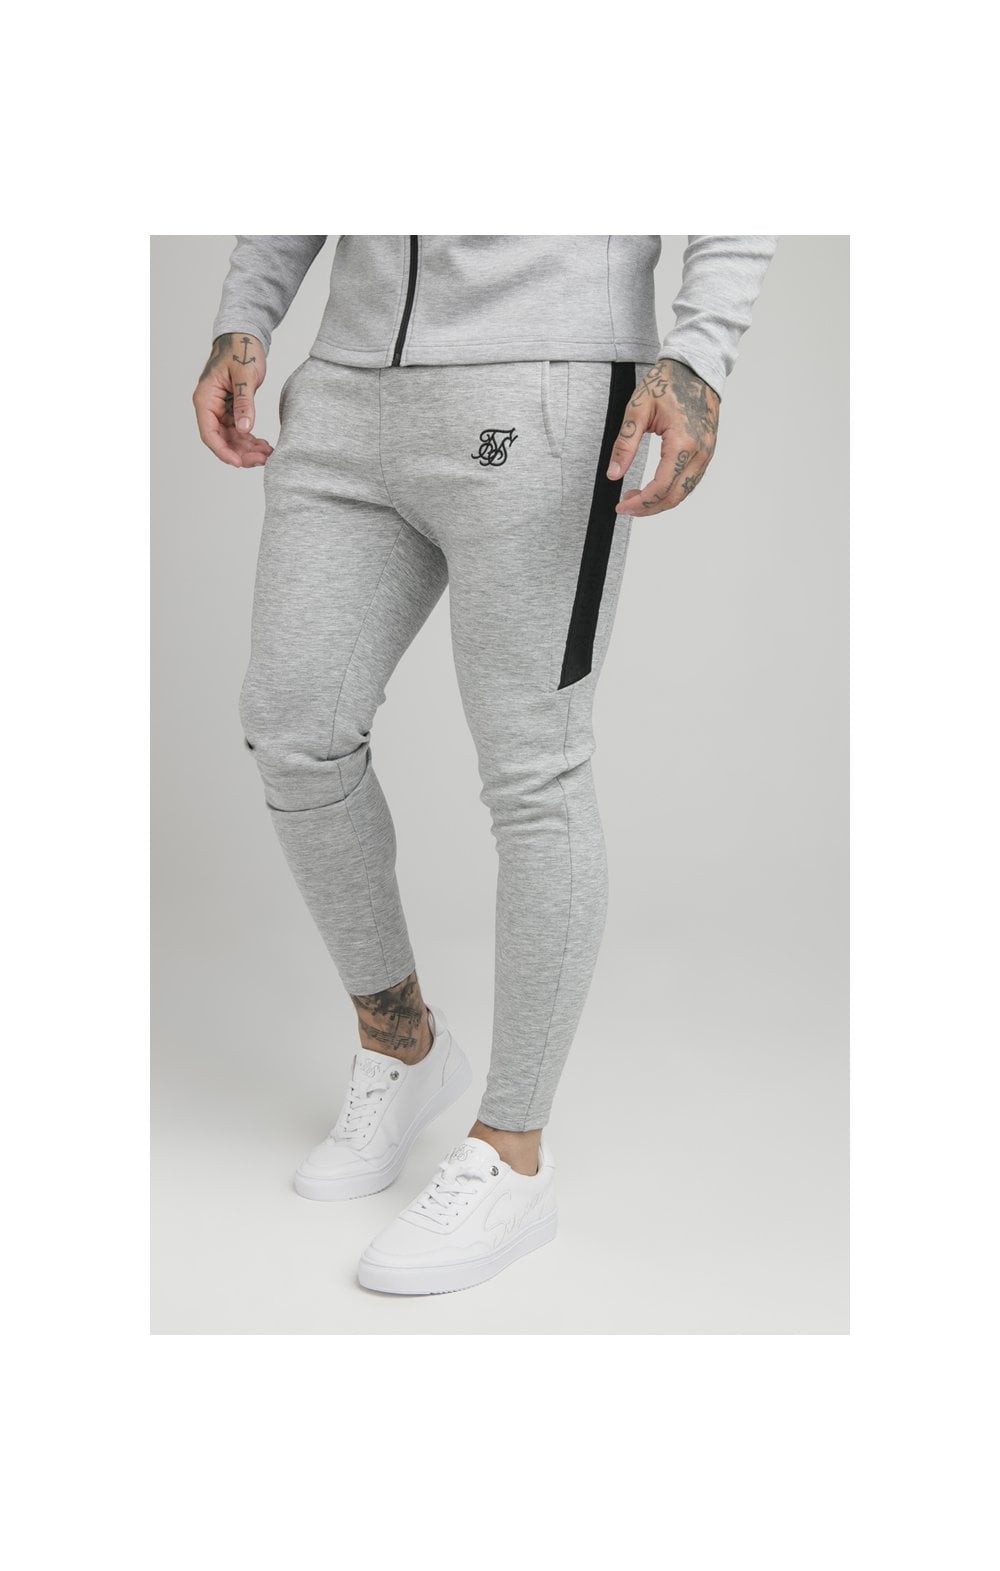 Black Motion Tape Zip Through Hoodie And Jogger Set (5)